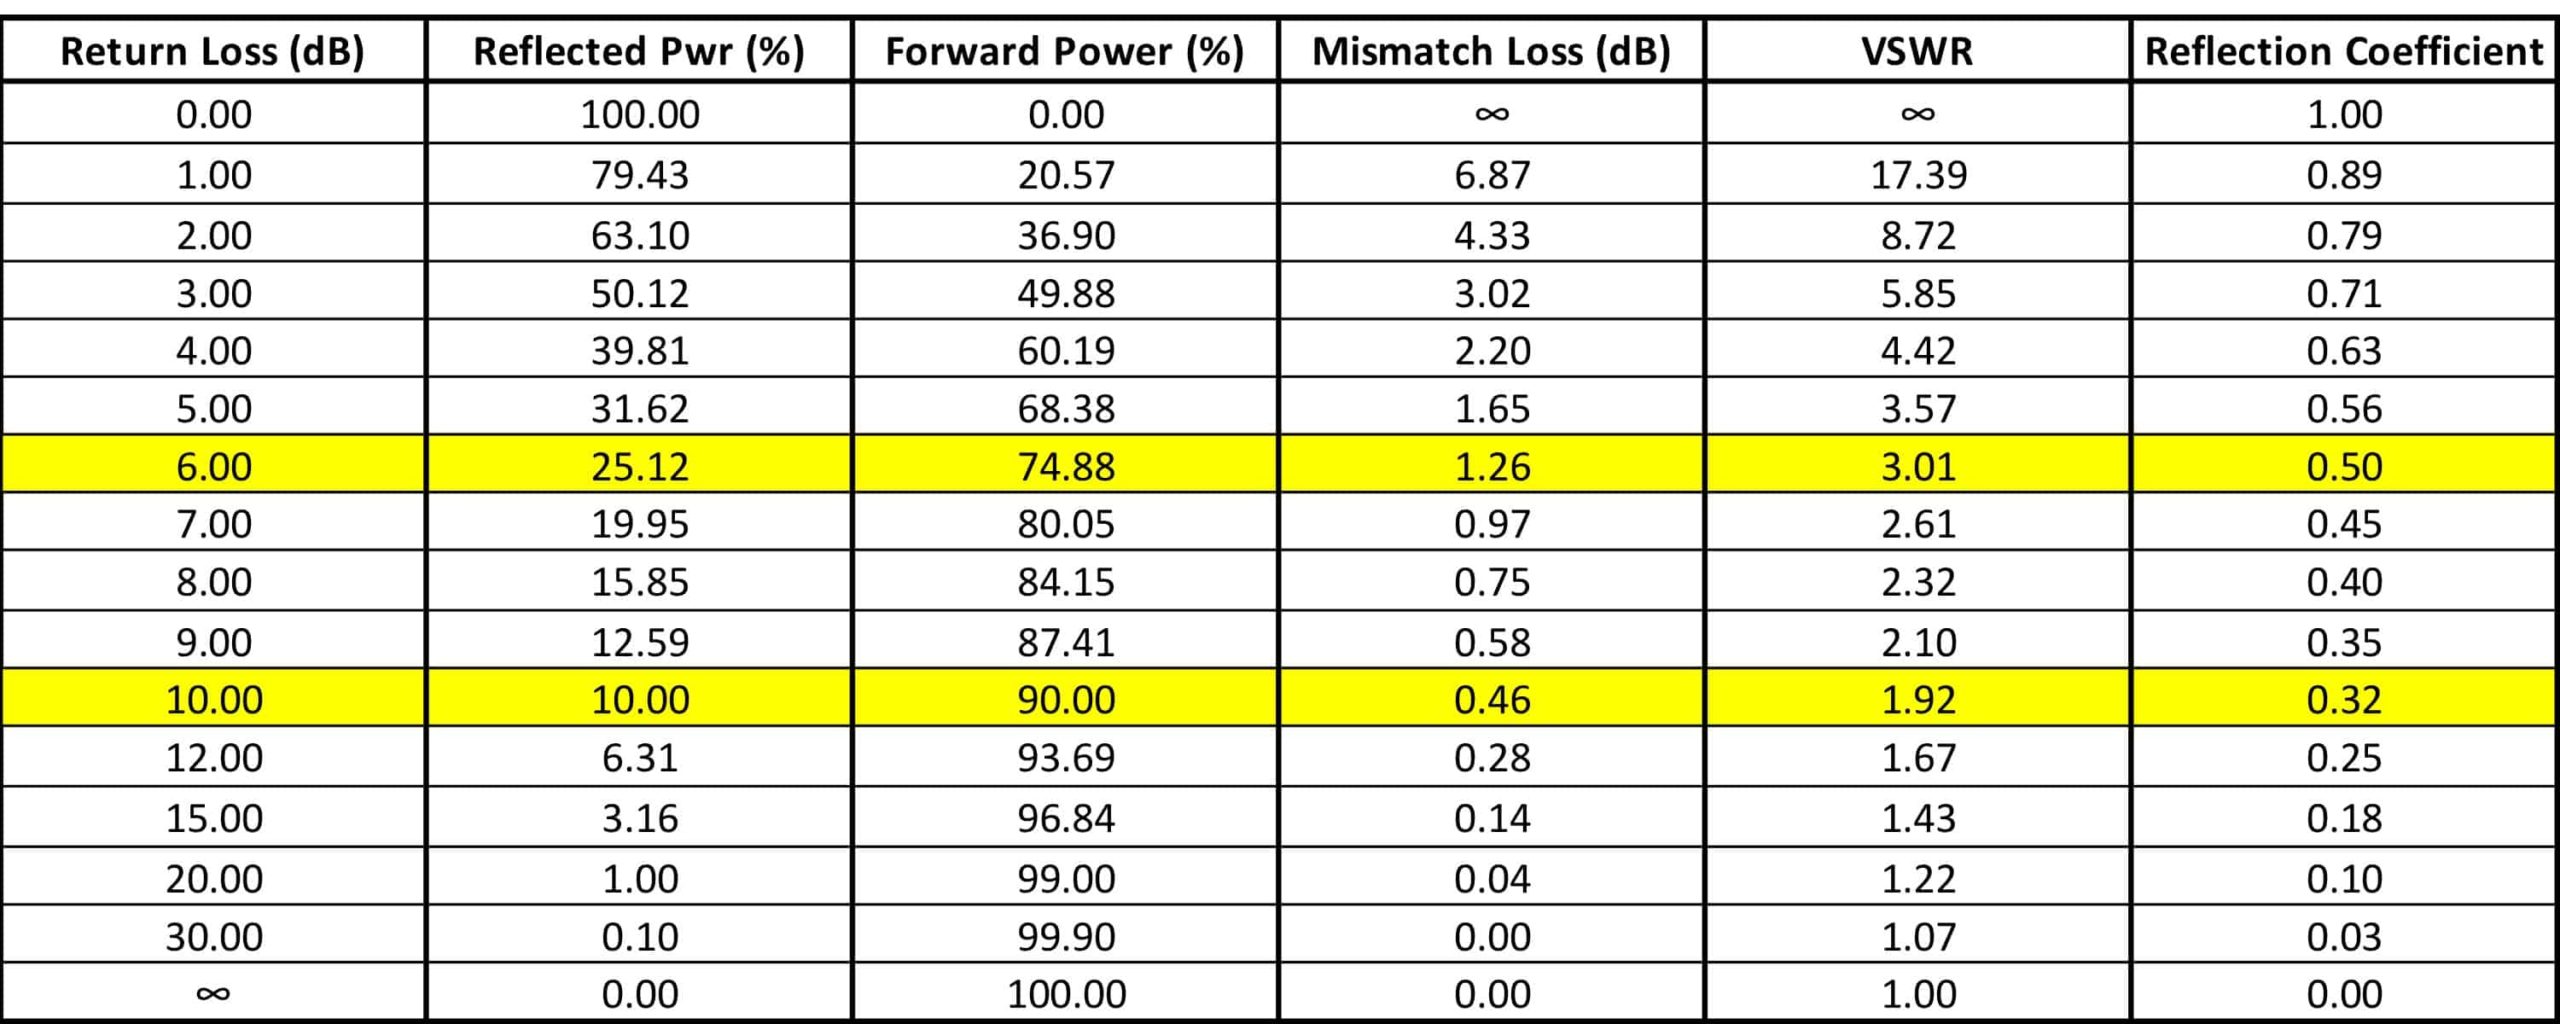 Return Loss Mismatch and VSWR Conversion Table